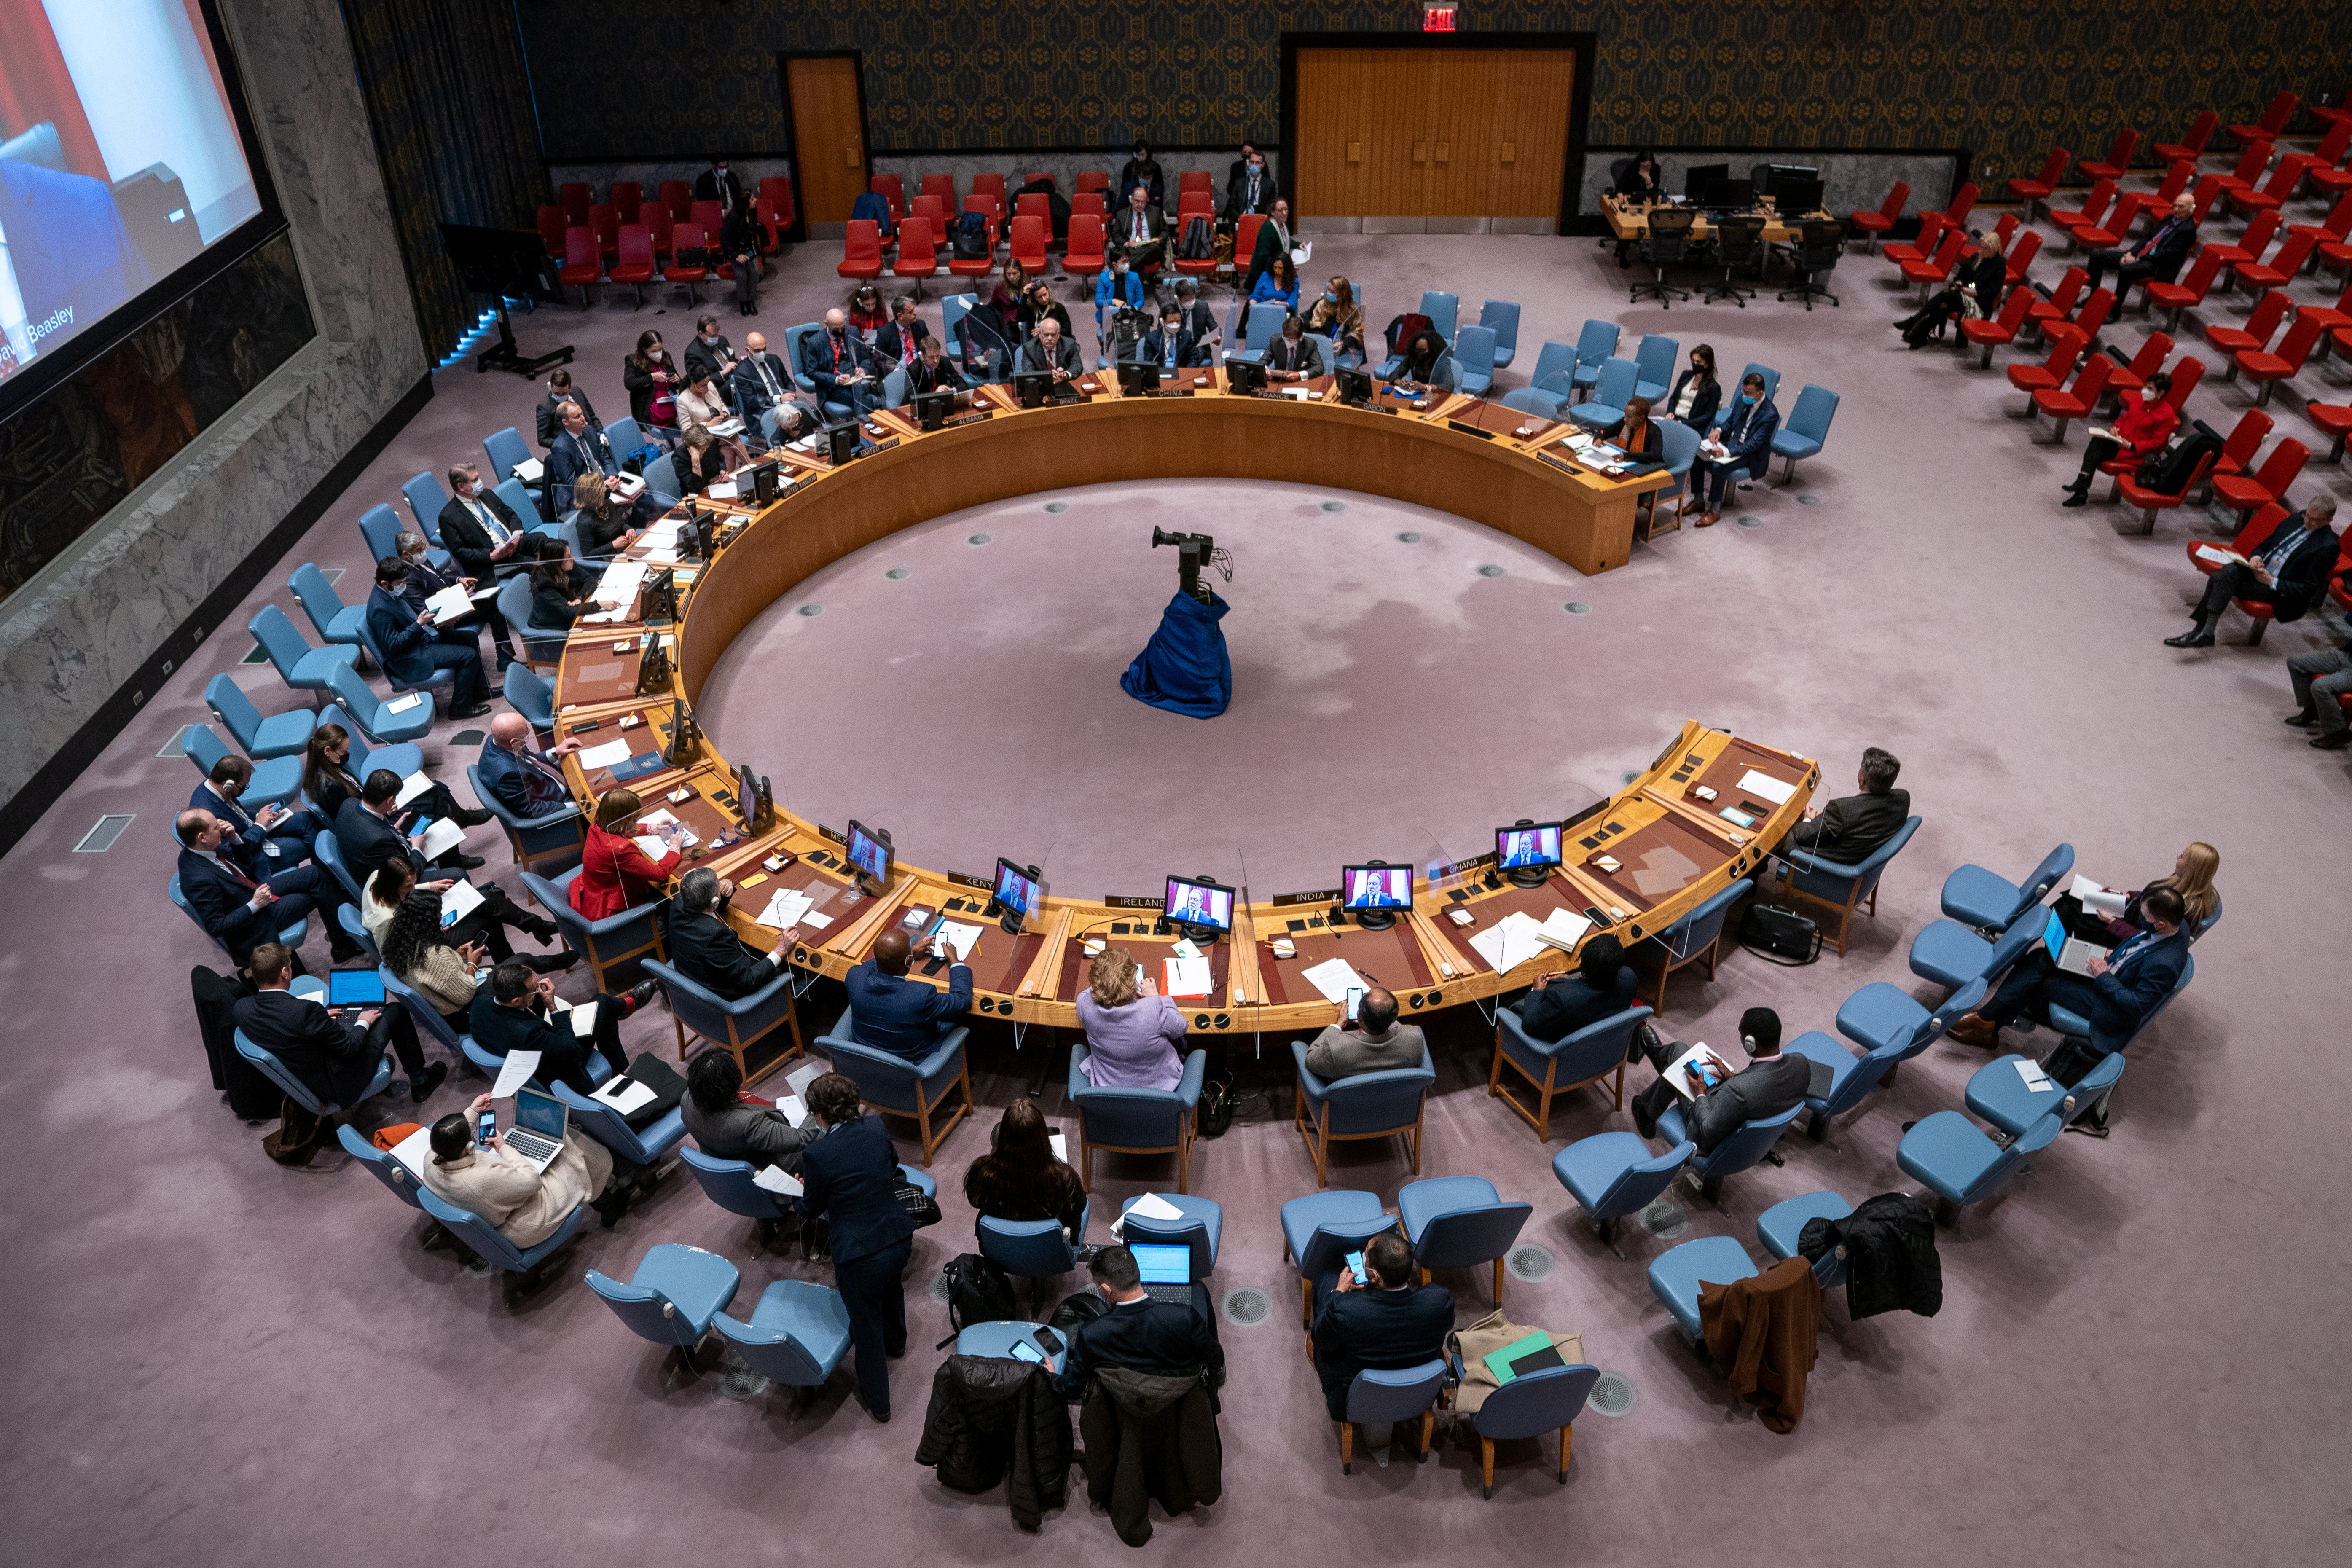 The United Nations Security Council assembles for a meeting on humanitarian relief aid